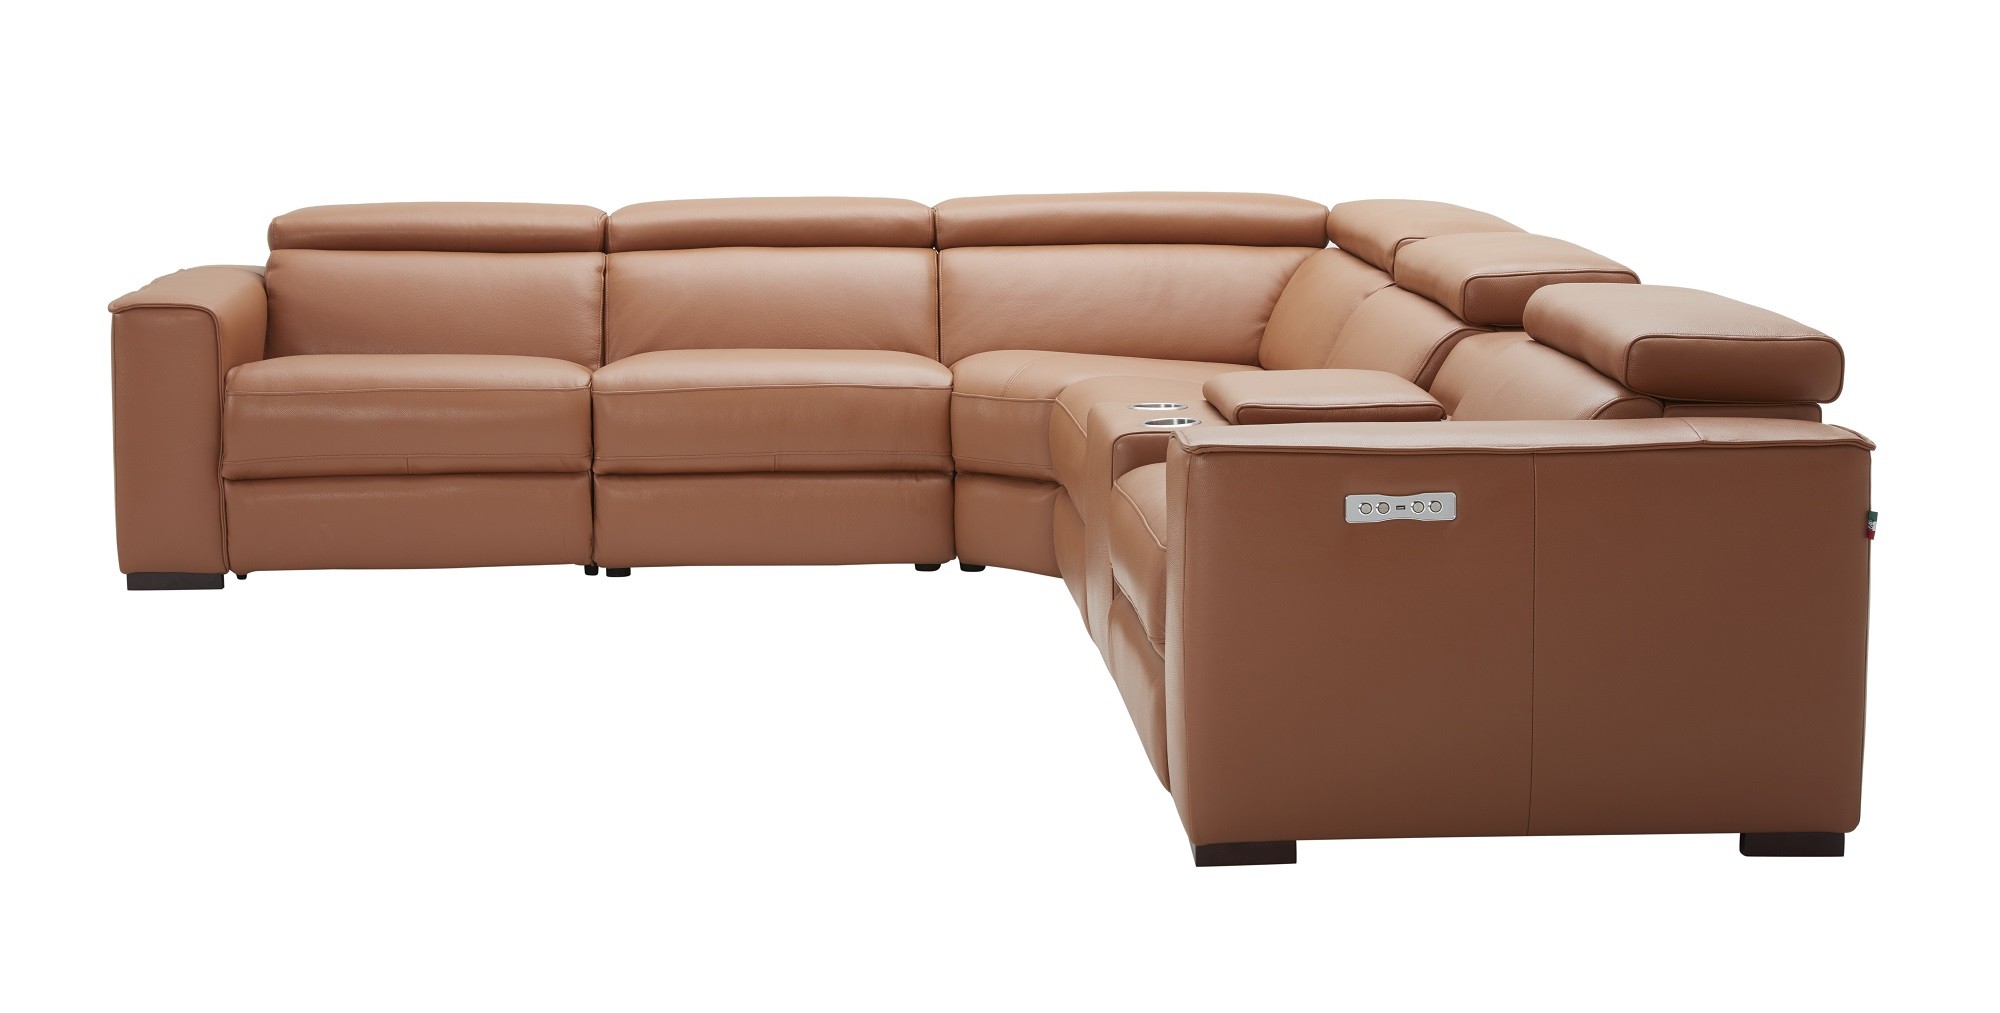 Advanced Adjustable Leather Corner Sectional Sofa with Cushions - Click Image to Close